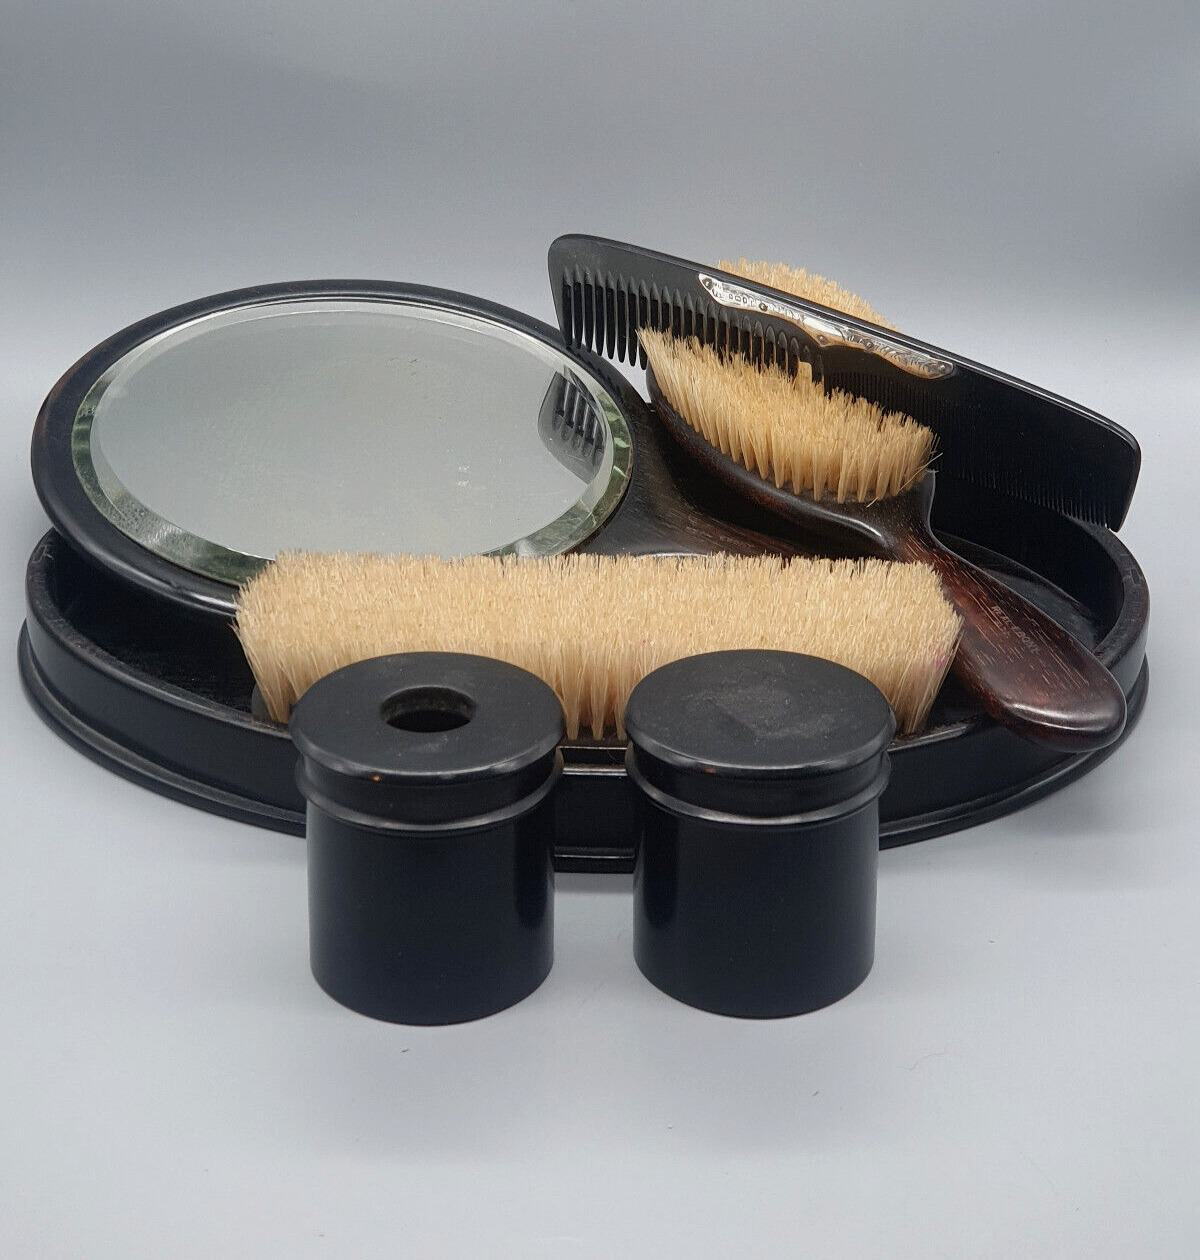 An Elegant Ebony Dressing Table Set From the early 20thC